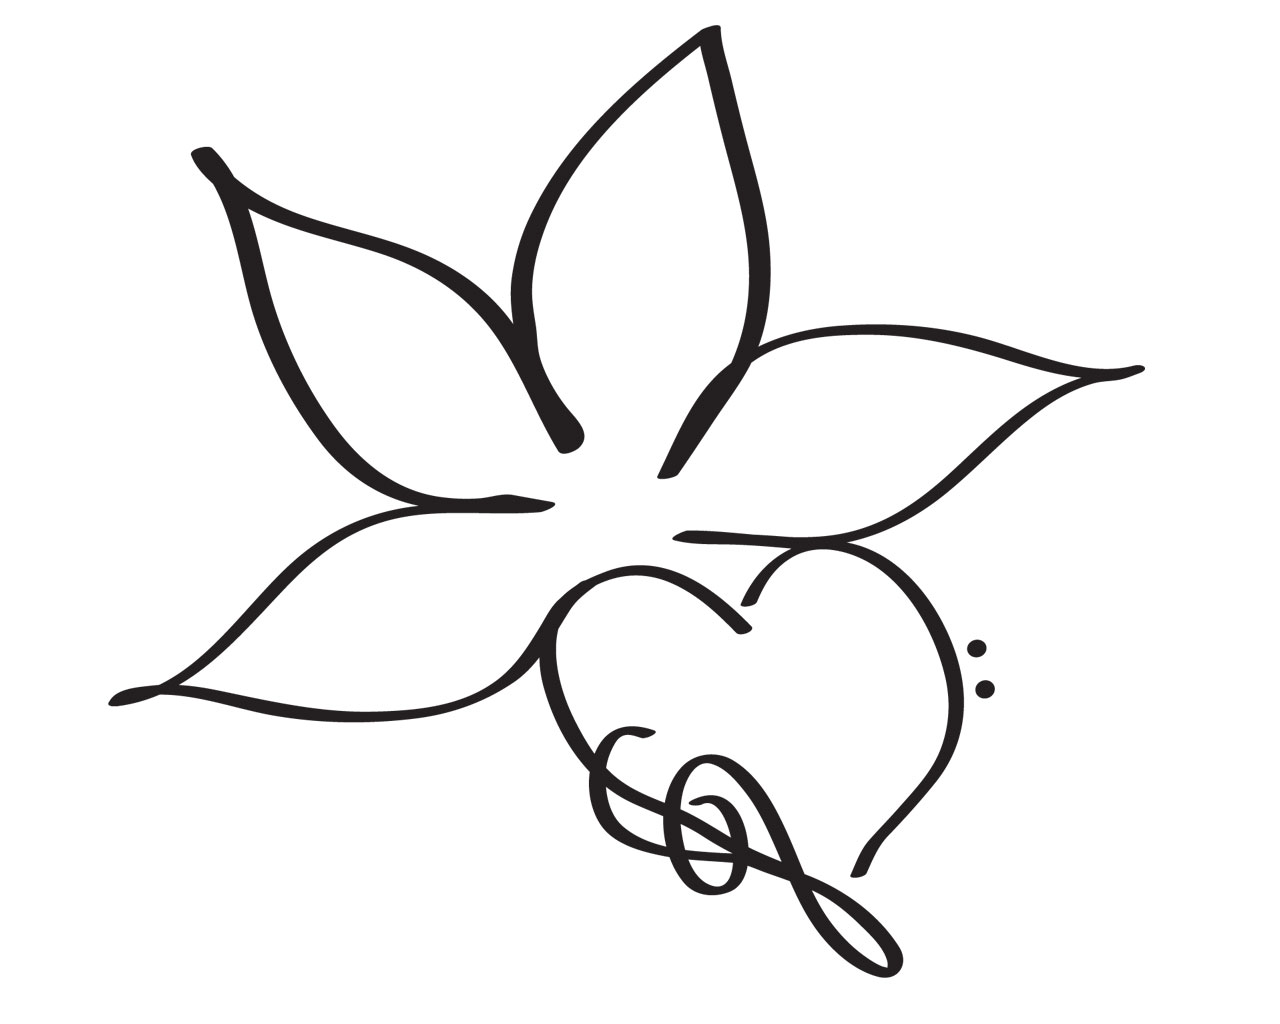 Flowers Drawings Basic - ClipArt Best